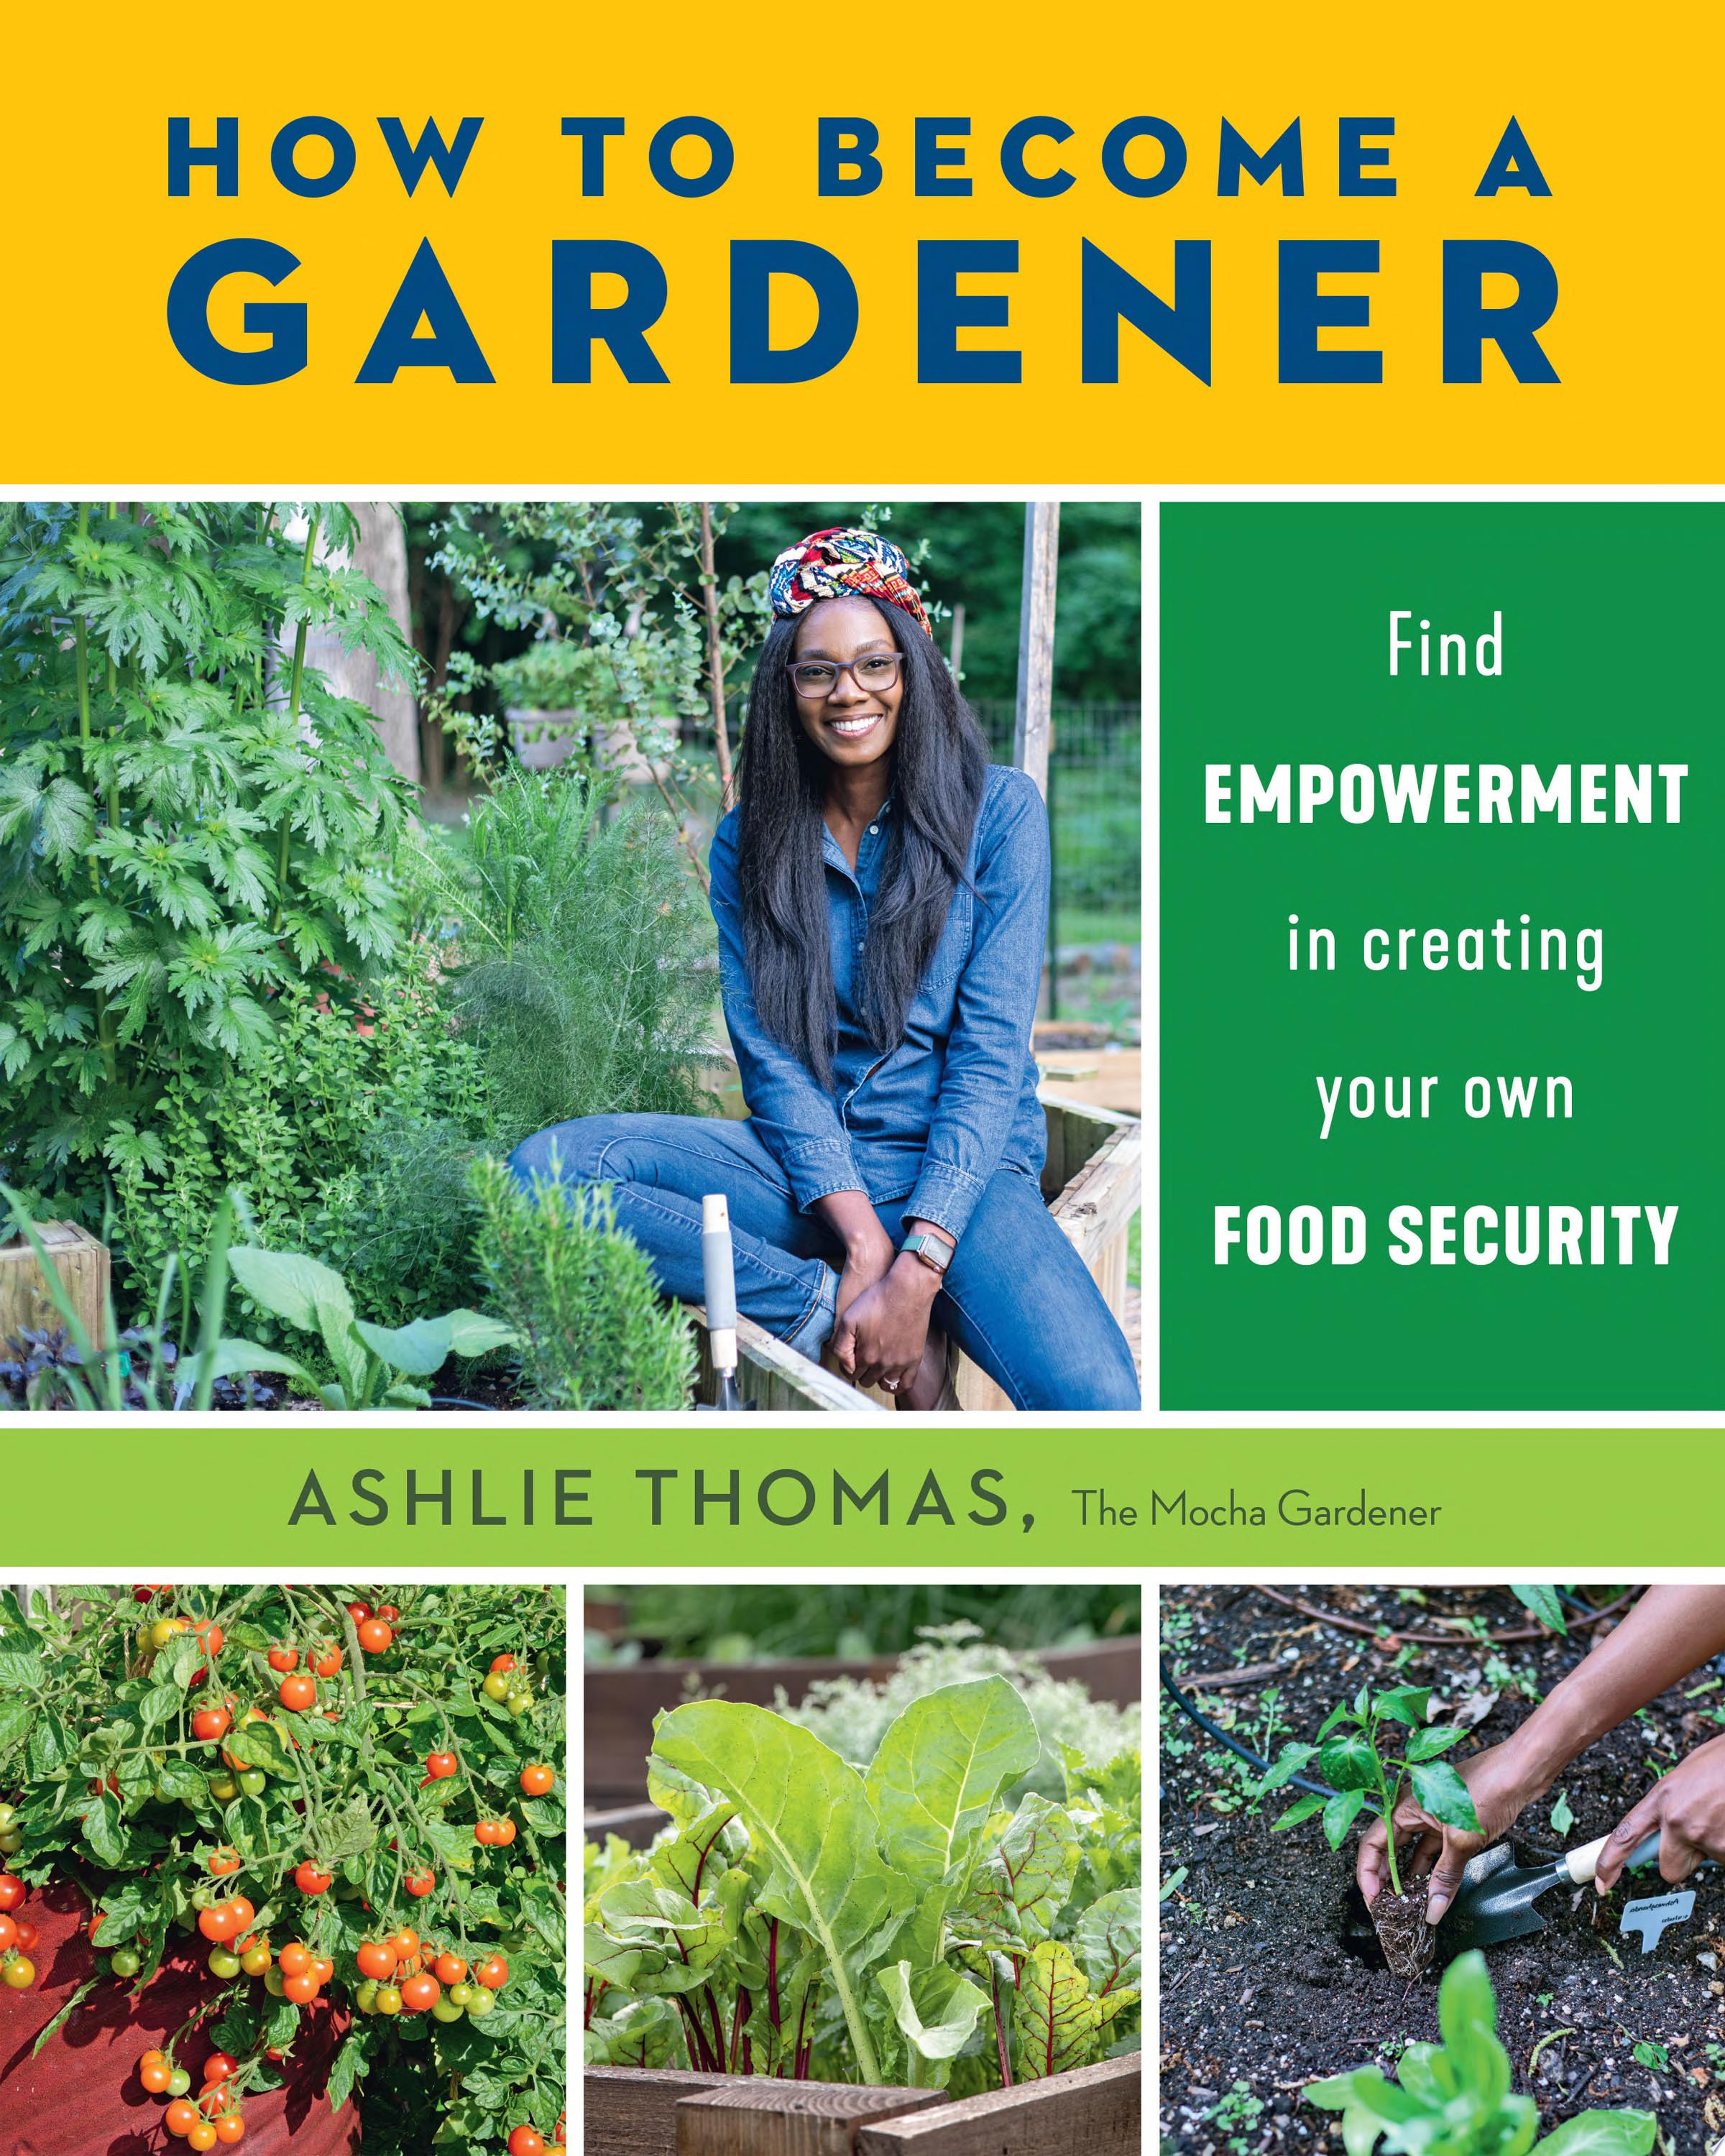 Image for "How to Become a Gardener"